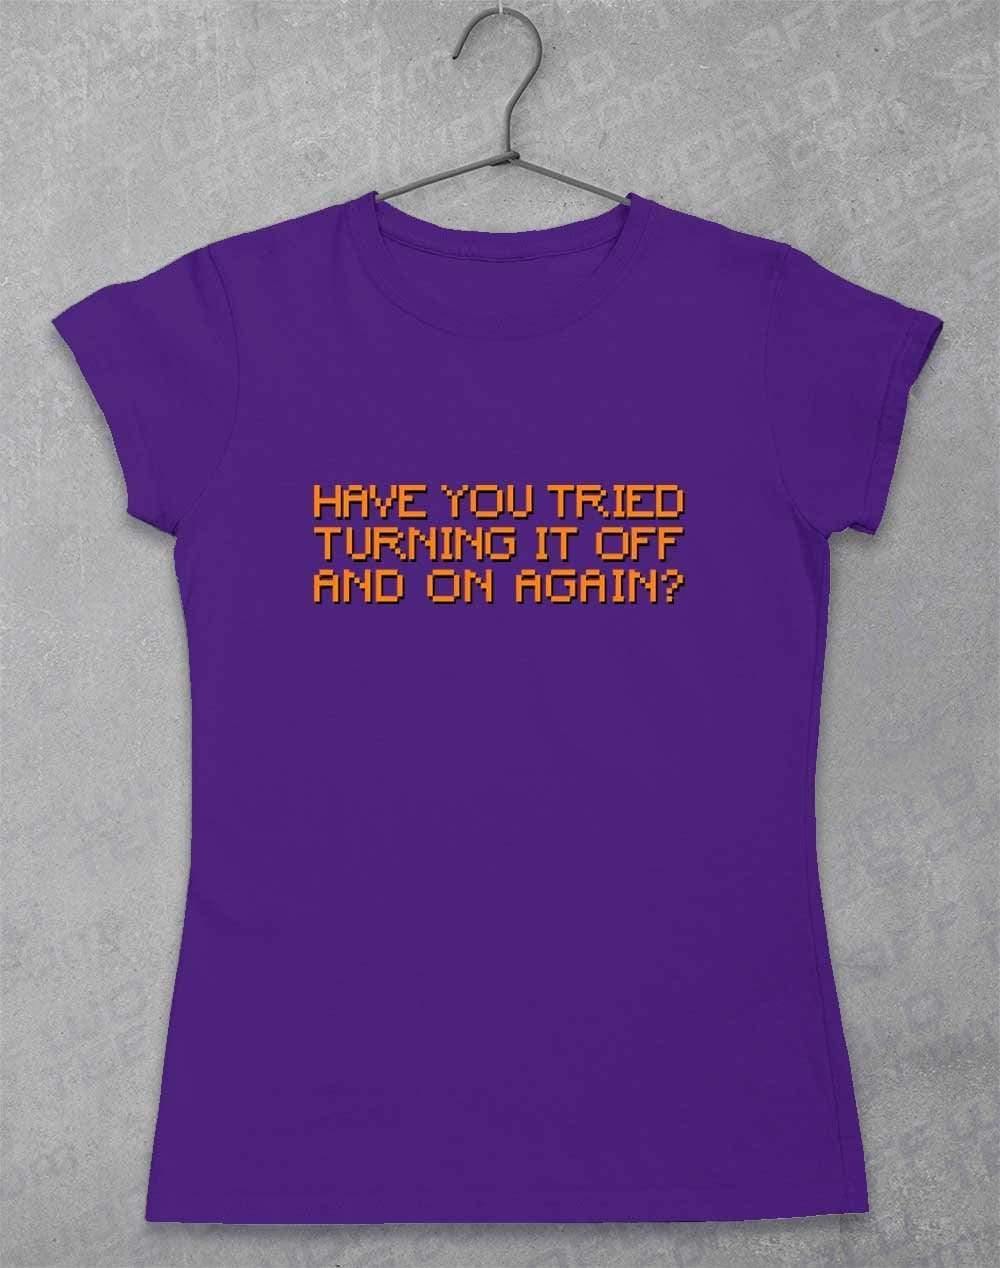 Off and On Again Women's T-Shirt 8-10 / Lilac  - Off World Tees